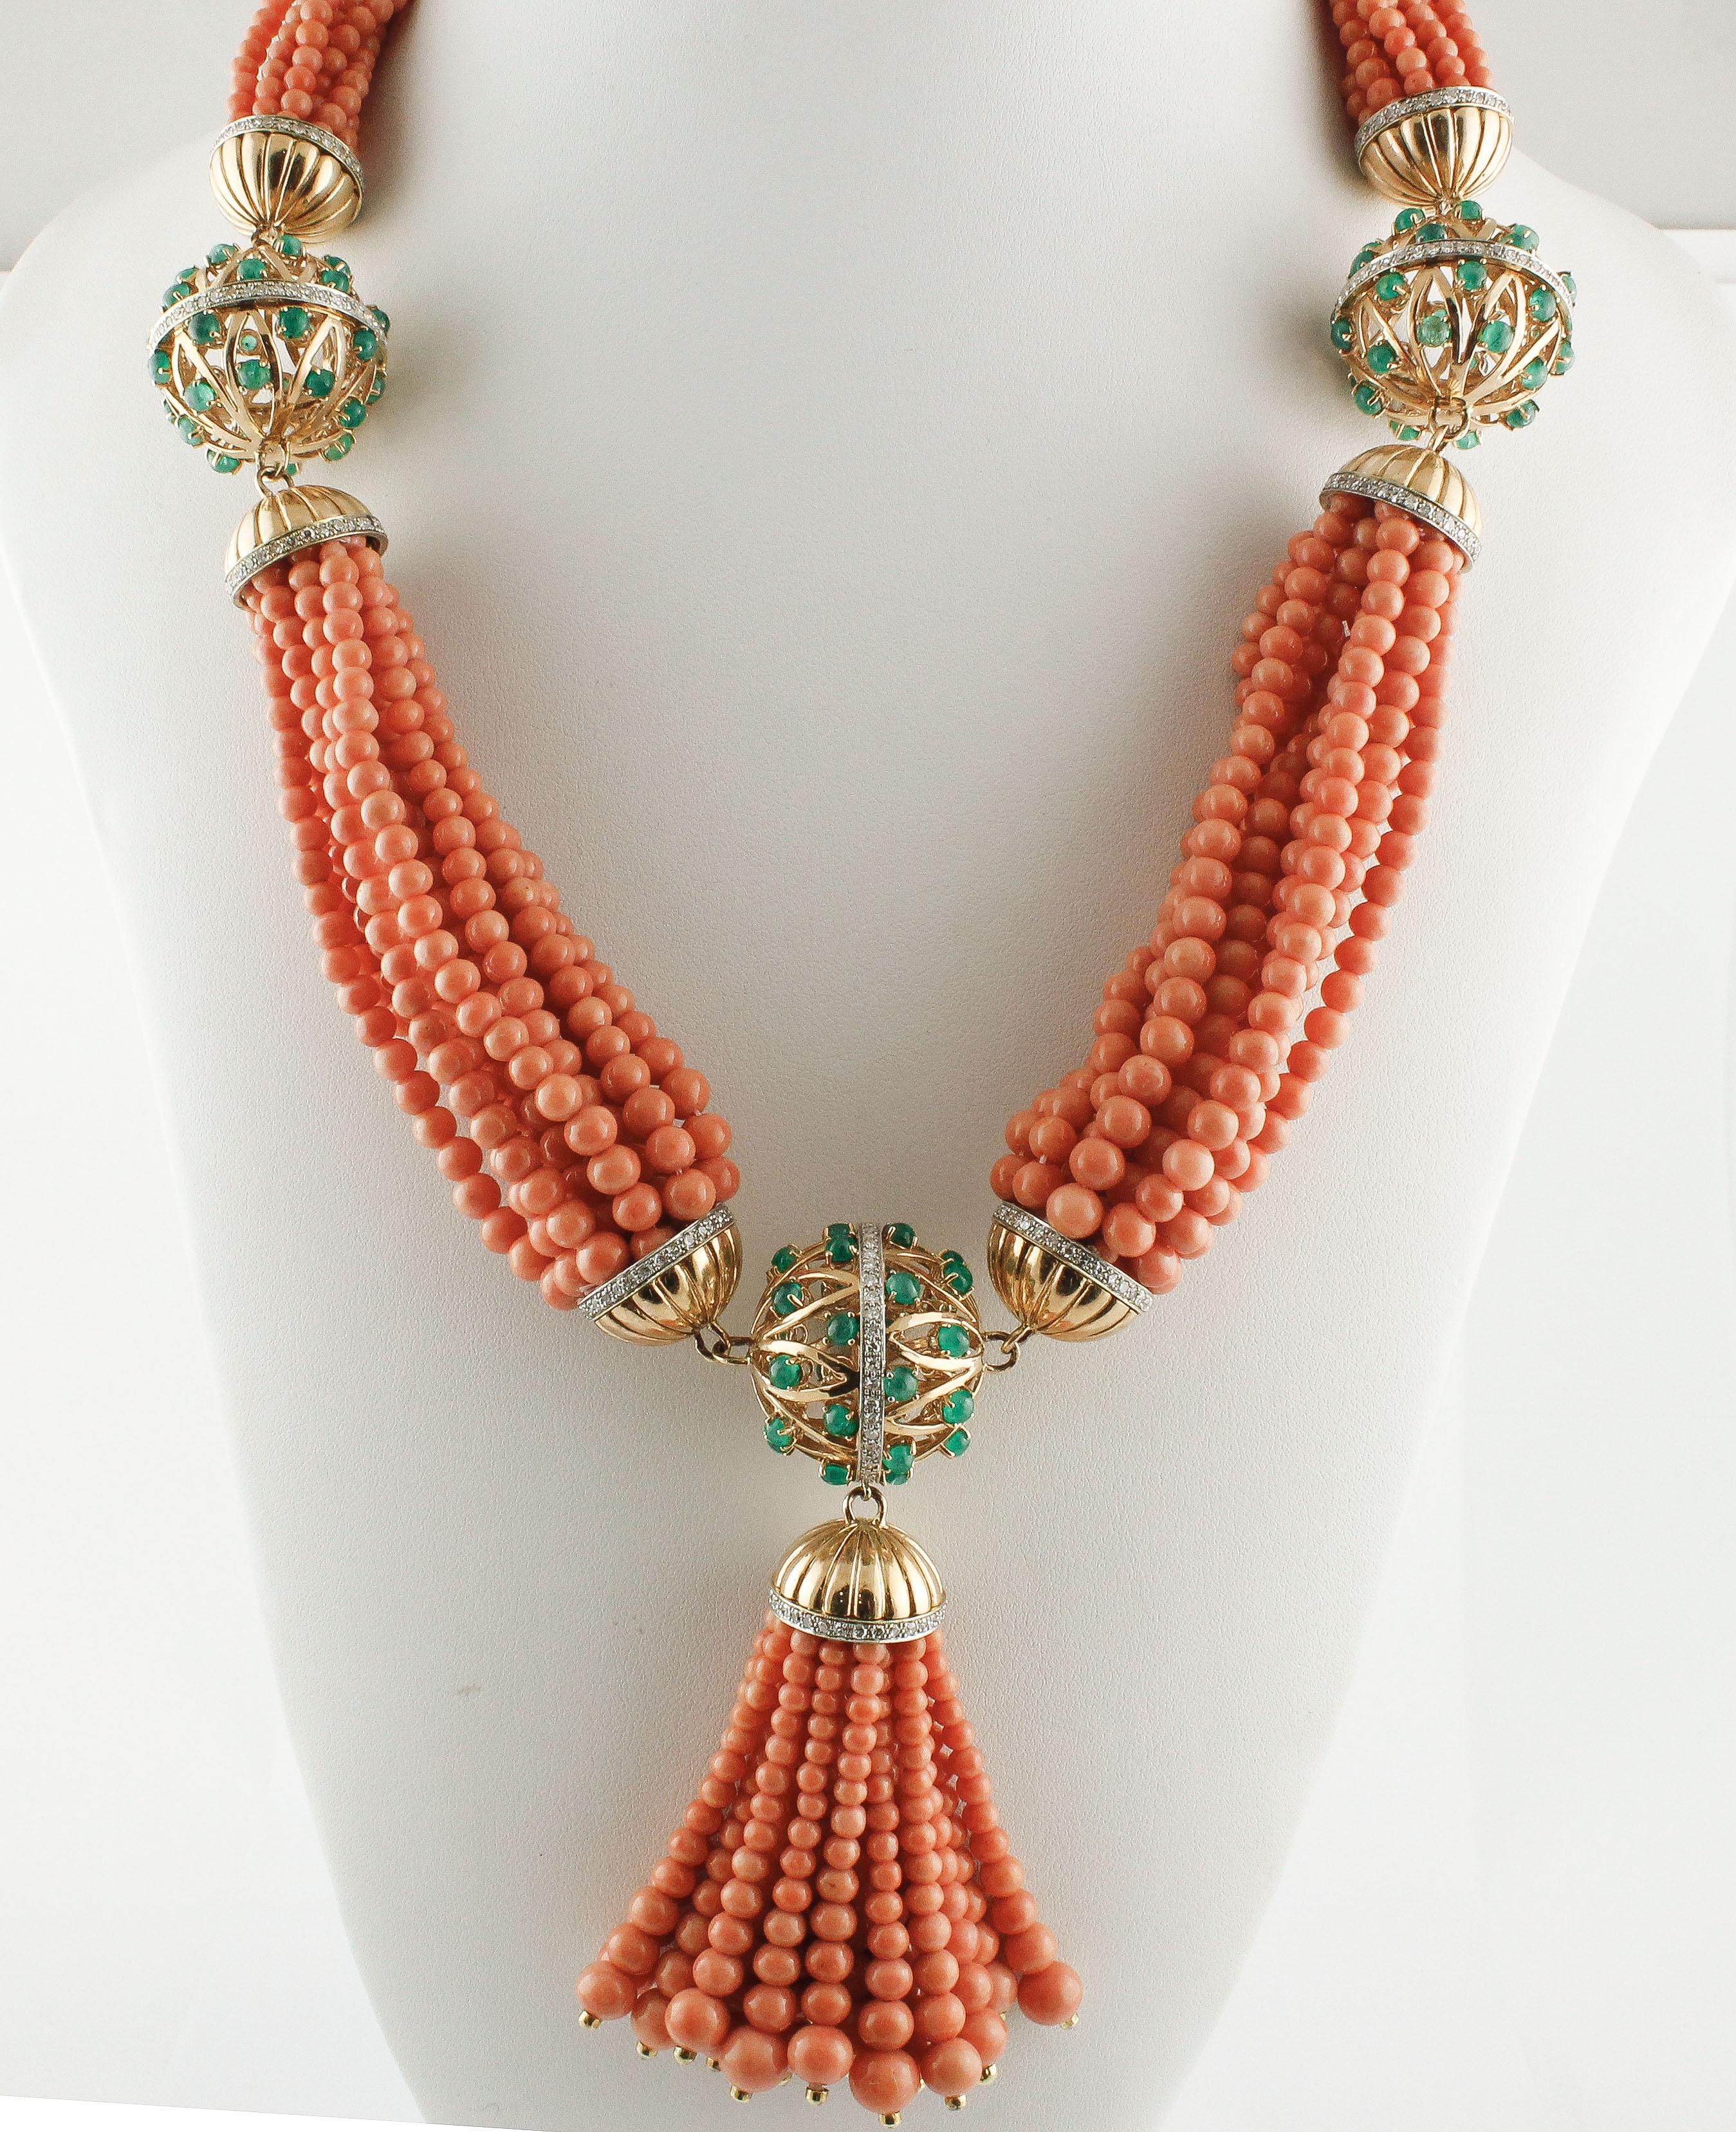 Elegant necklace composed of multi strand of coral linked by spheres in 14Kt rose gold each adorned with three half spheres of emeralds and diamonds.
coral (184.40 gr),
emeralds(16.09Kt) 
diamonds(7.25 Kt)
tot weight 263.8gr
Rf.1295008

For any